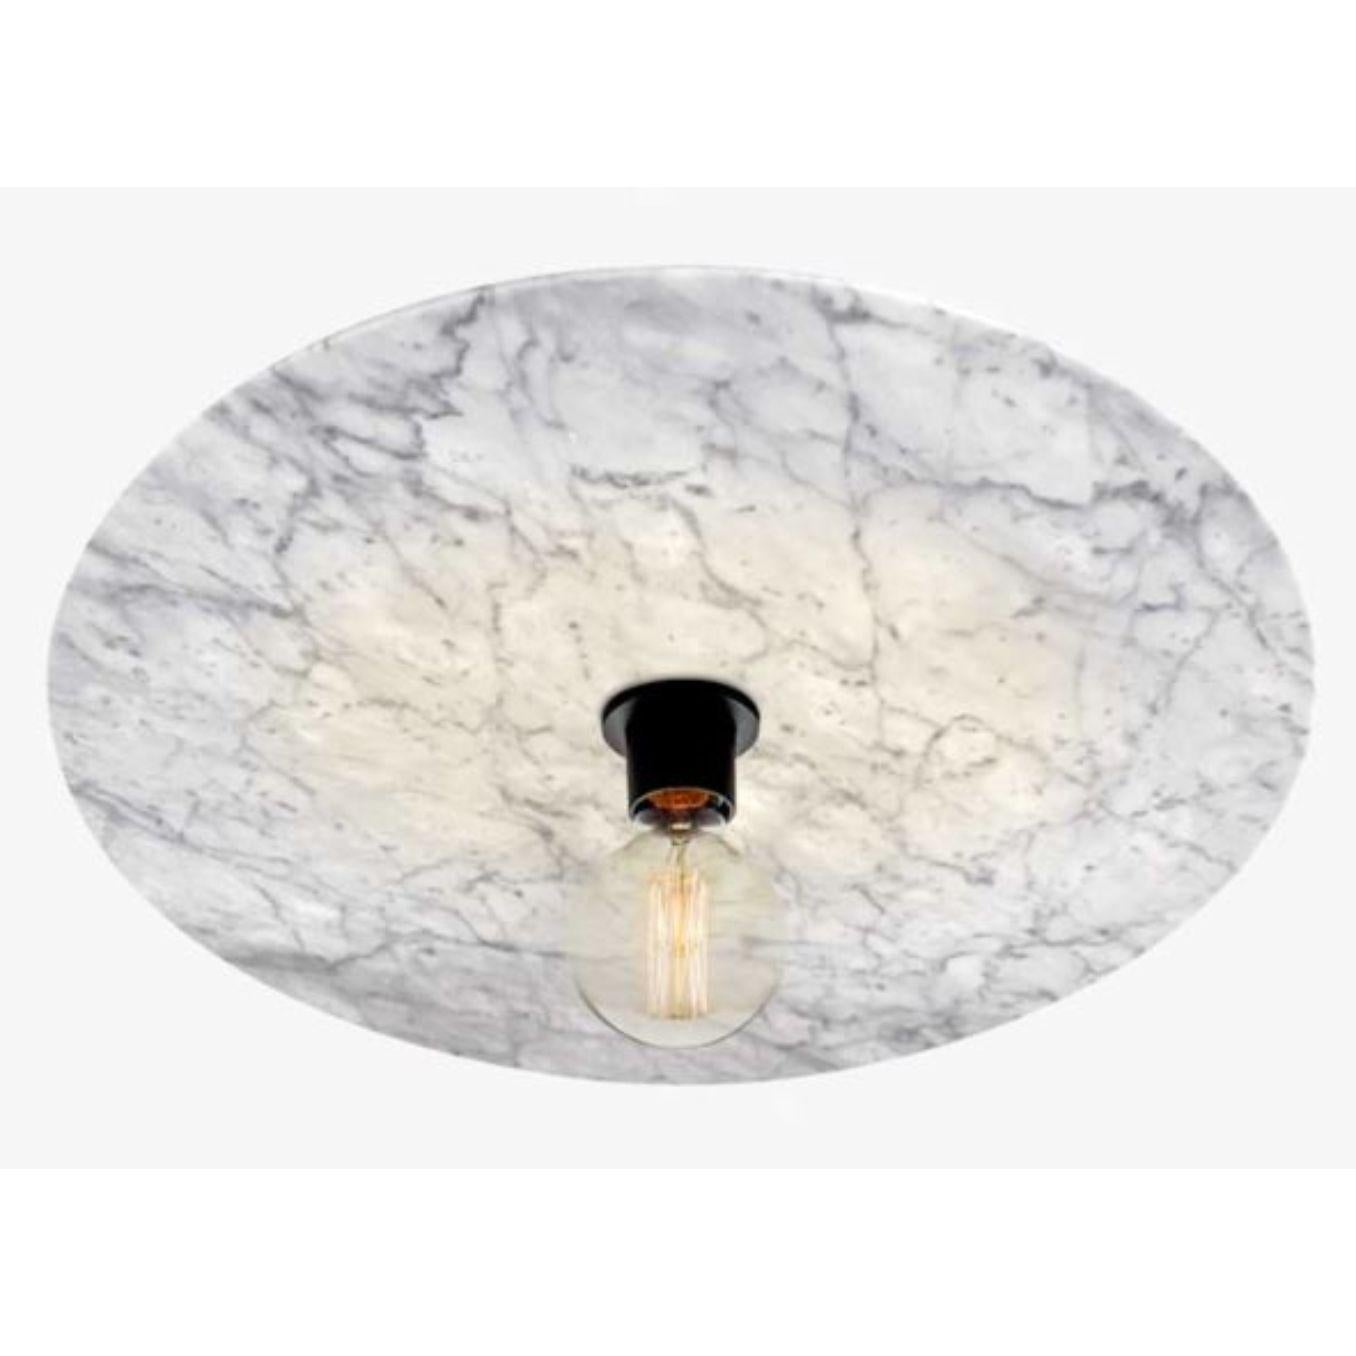 Venus ceiling light by RADAR
Design: Bastien Taillard
Materials: White Carrara marble, matte black thermolacquered metal structure, matt white thermo lacquered front ring.
Dimensions: D 60 x H 10 cm

All our lamps can be wired according to each